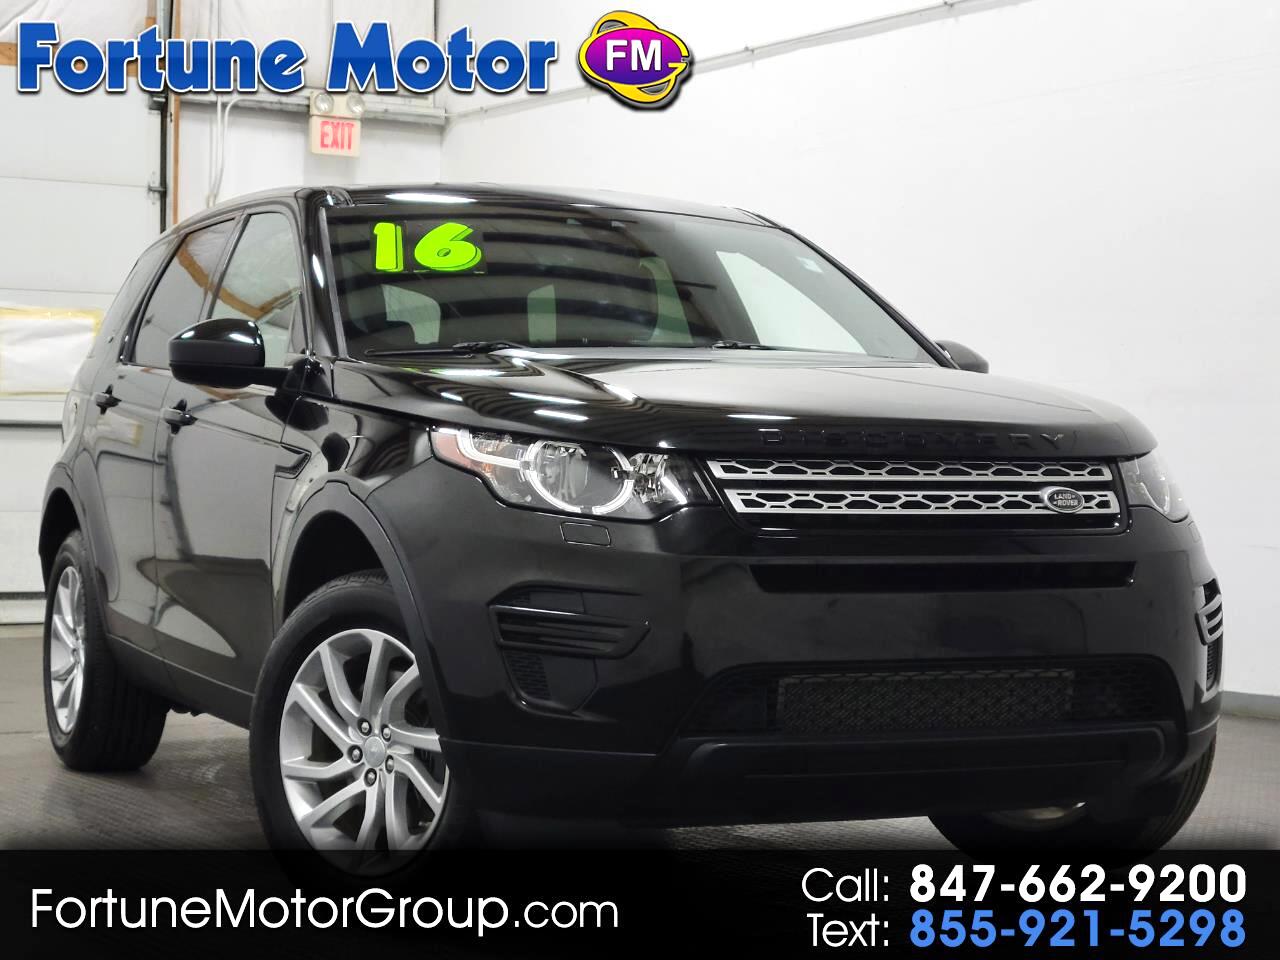 2016 Land Rover Discovery Sport AWD 4dr SE